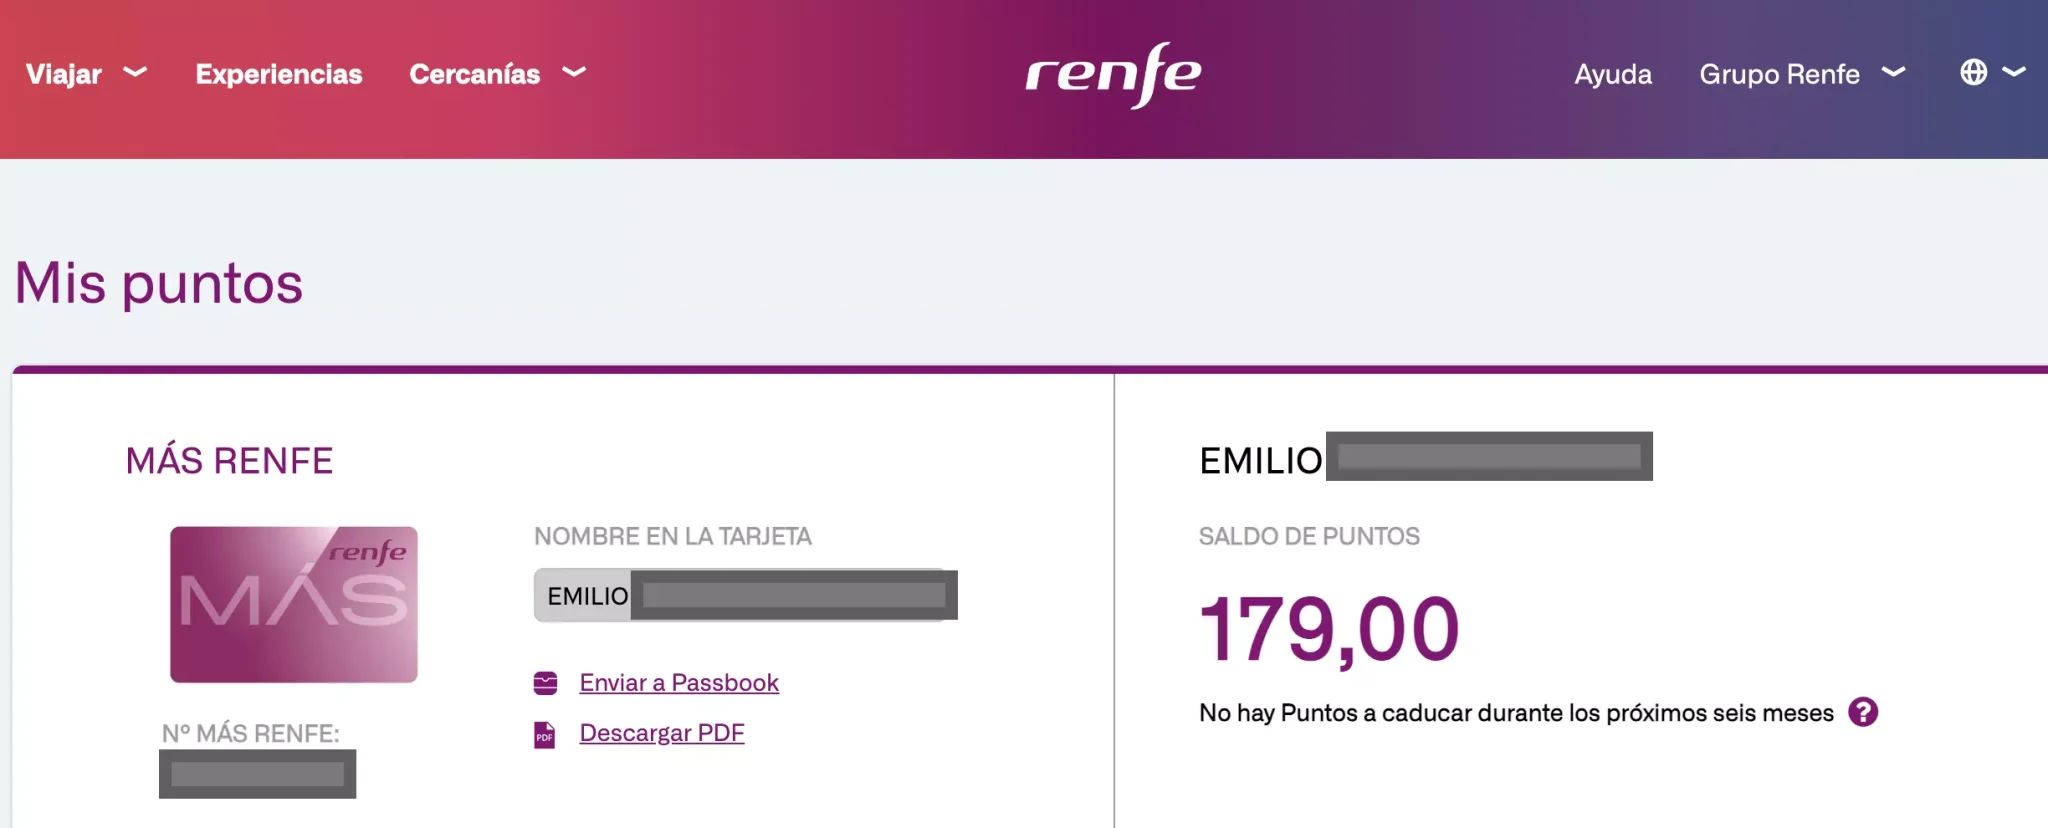 Points program to encourage sales in Renfe